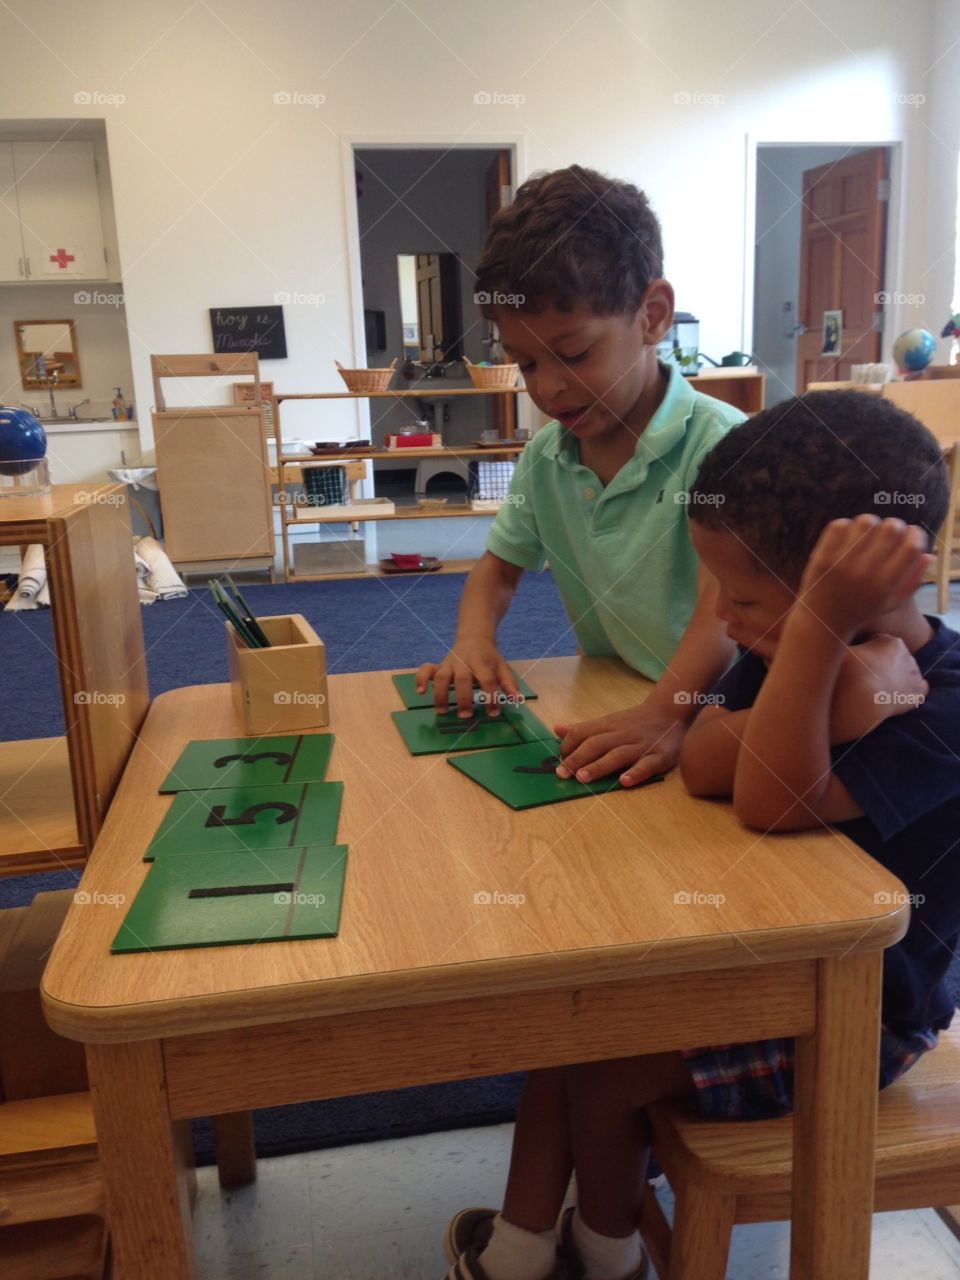 Two boys playing with numbers in classroom.